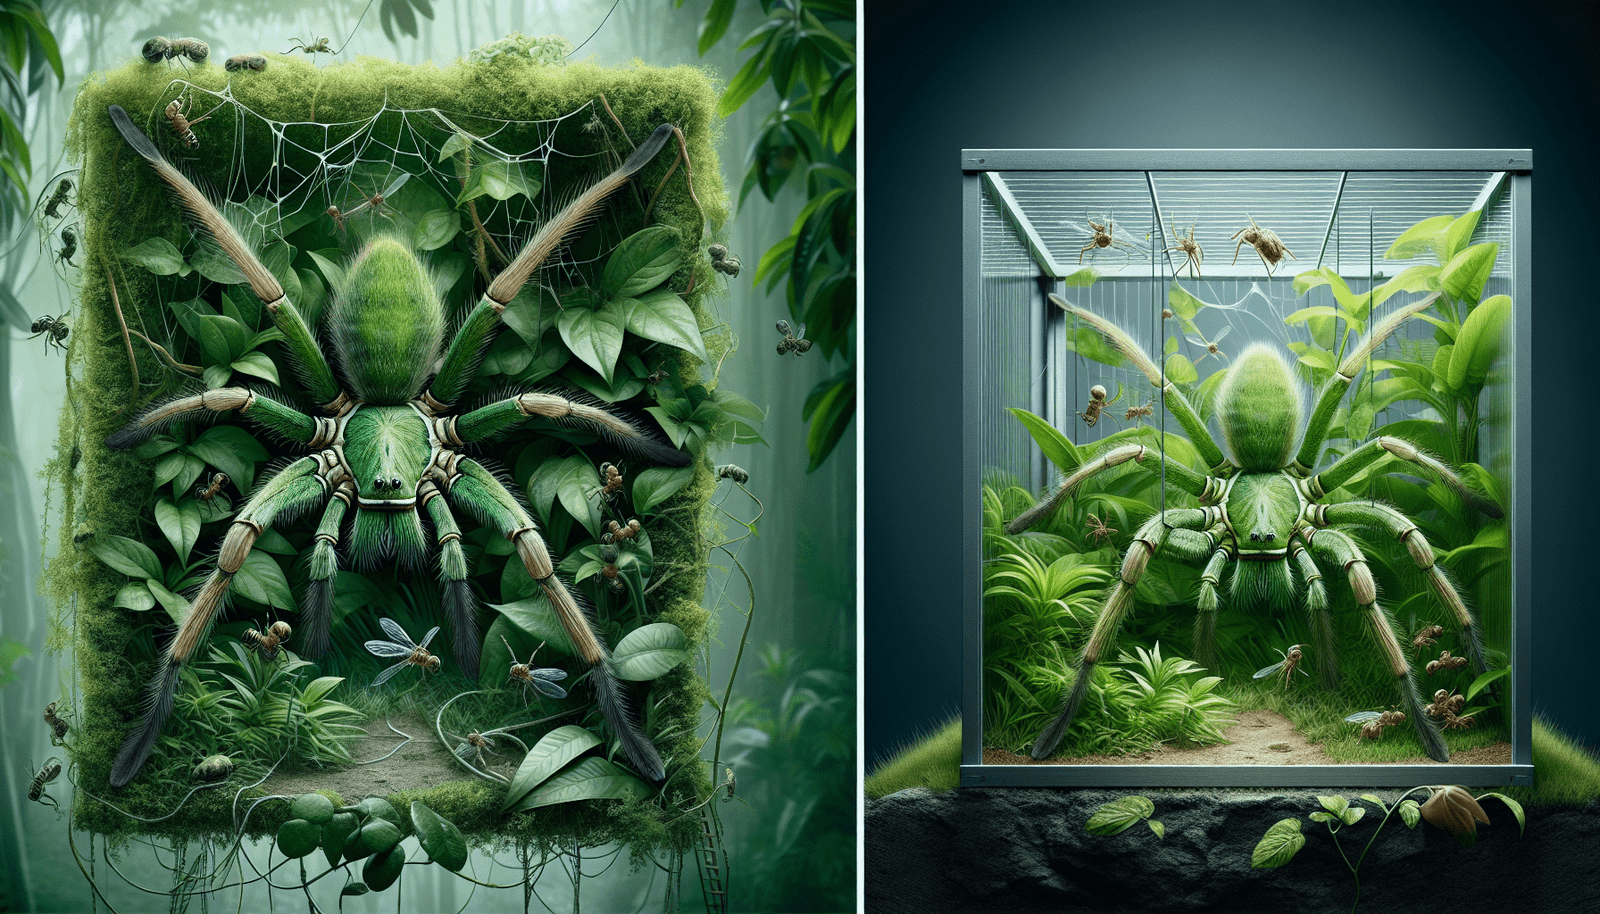 How Do You Replicate The Natural Environment Of The Enigmatic Green Huntsman Spider In Captivity?